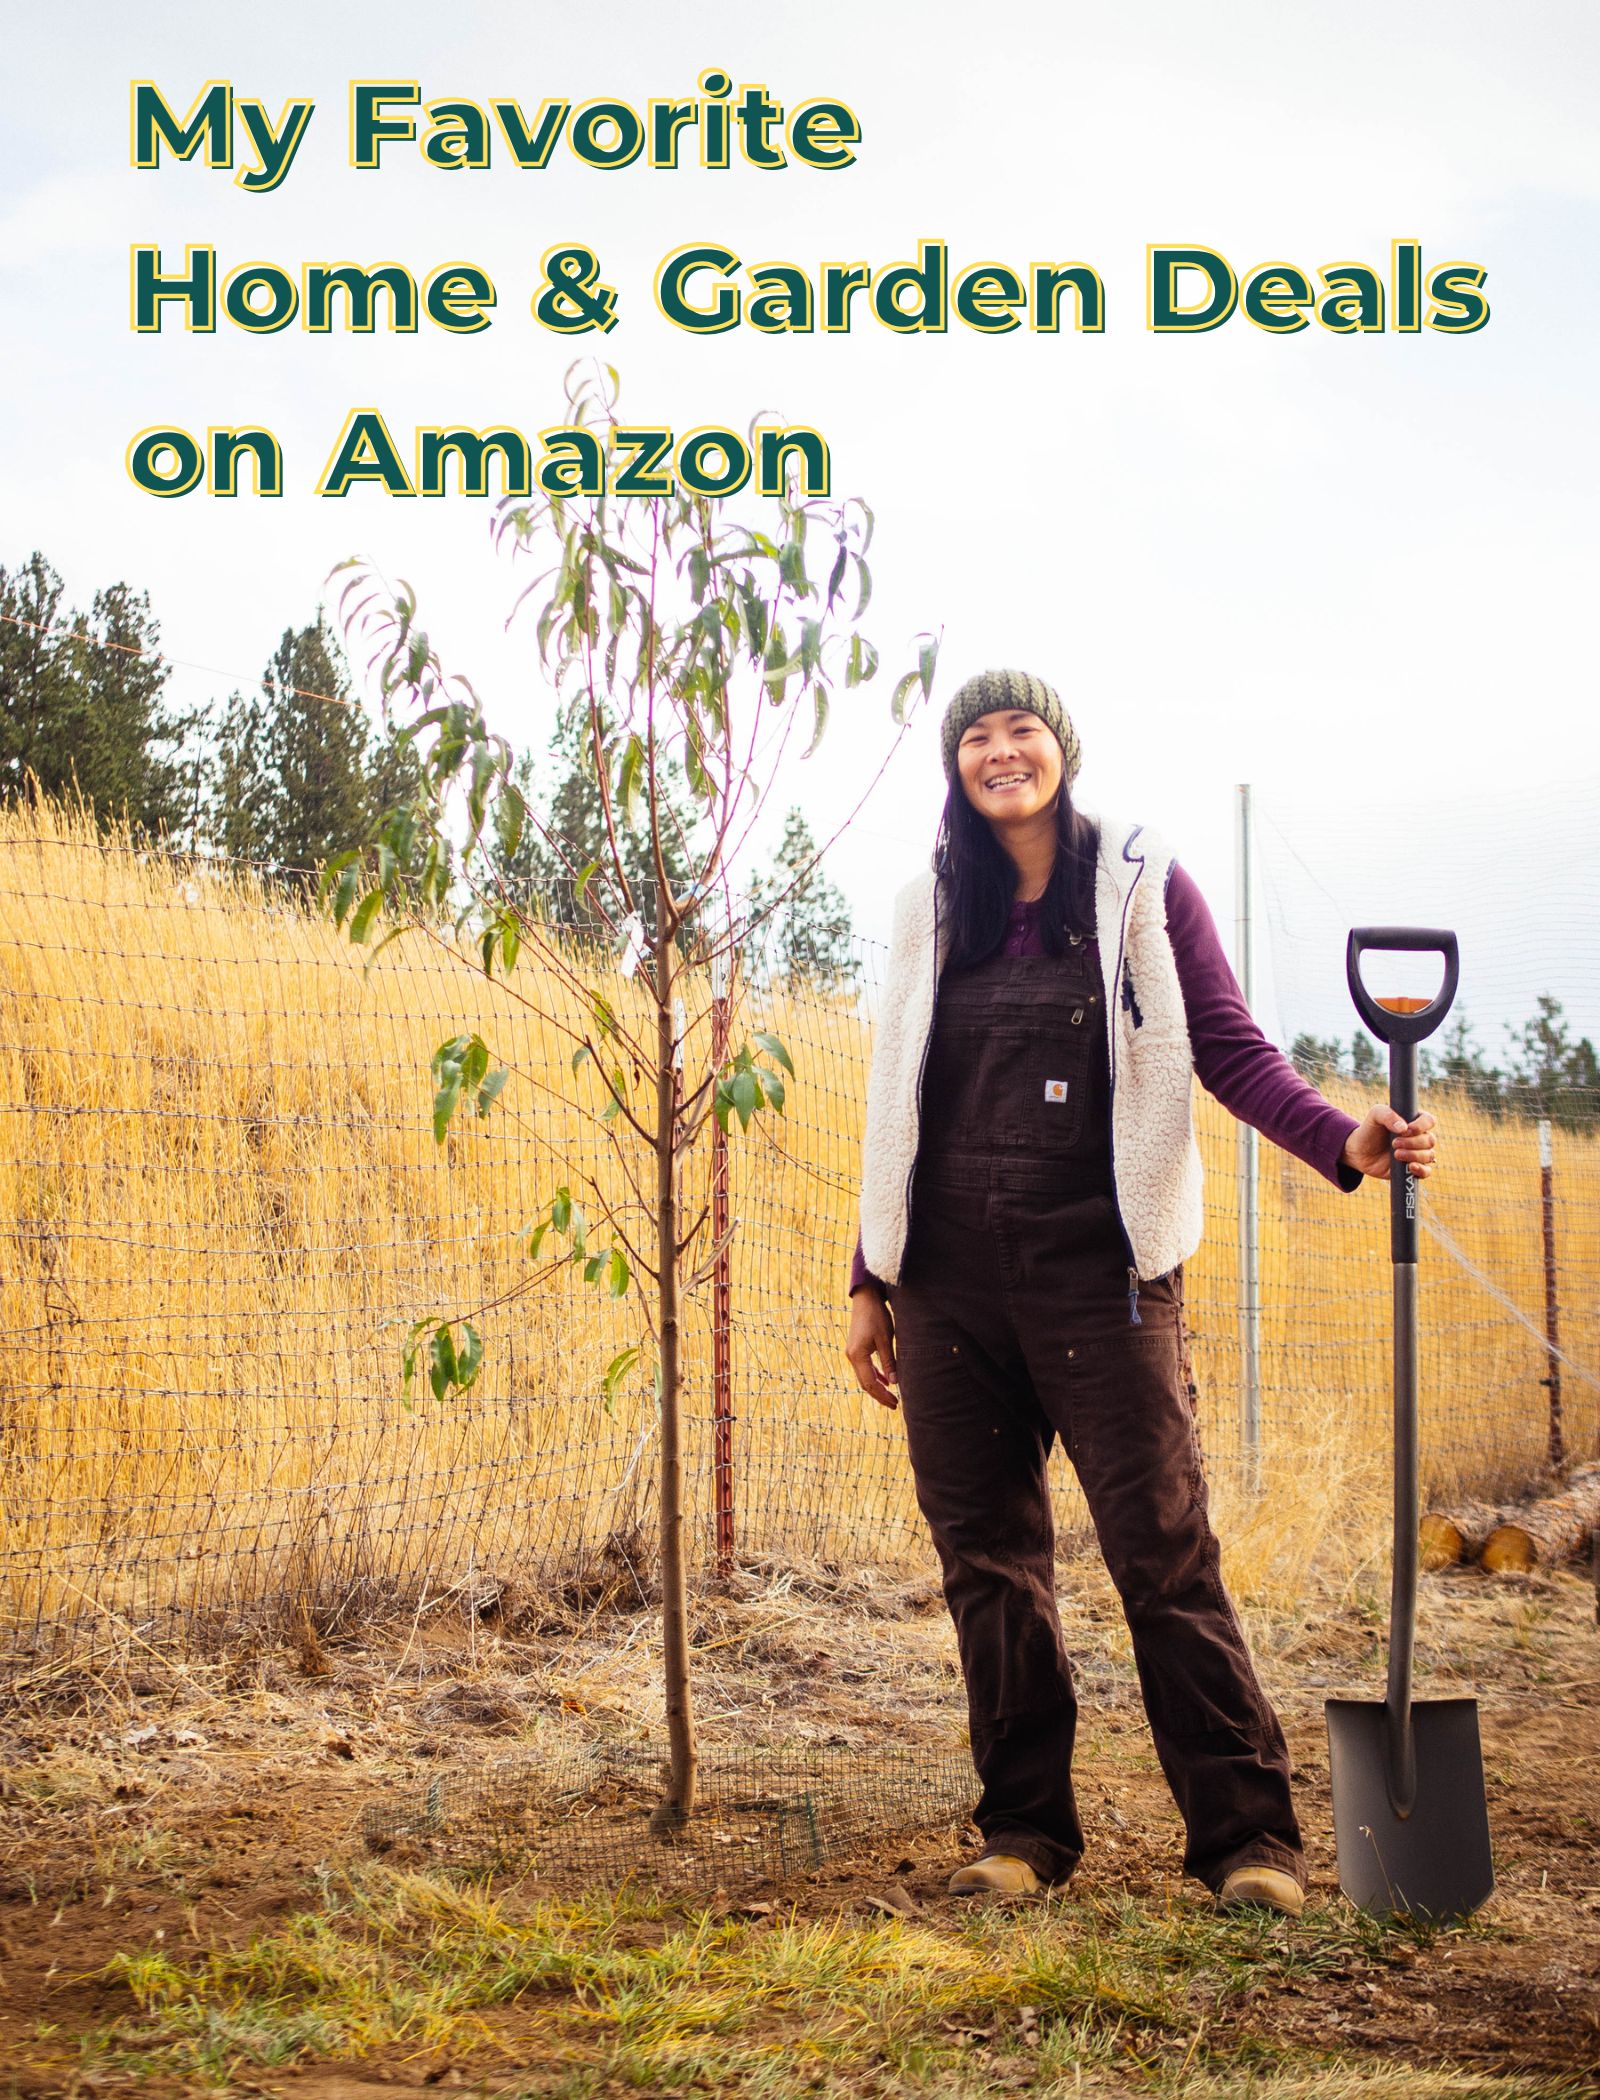 My favorite Amazon home and garden deals on Amazon